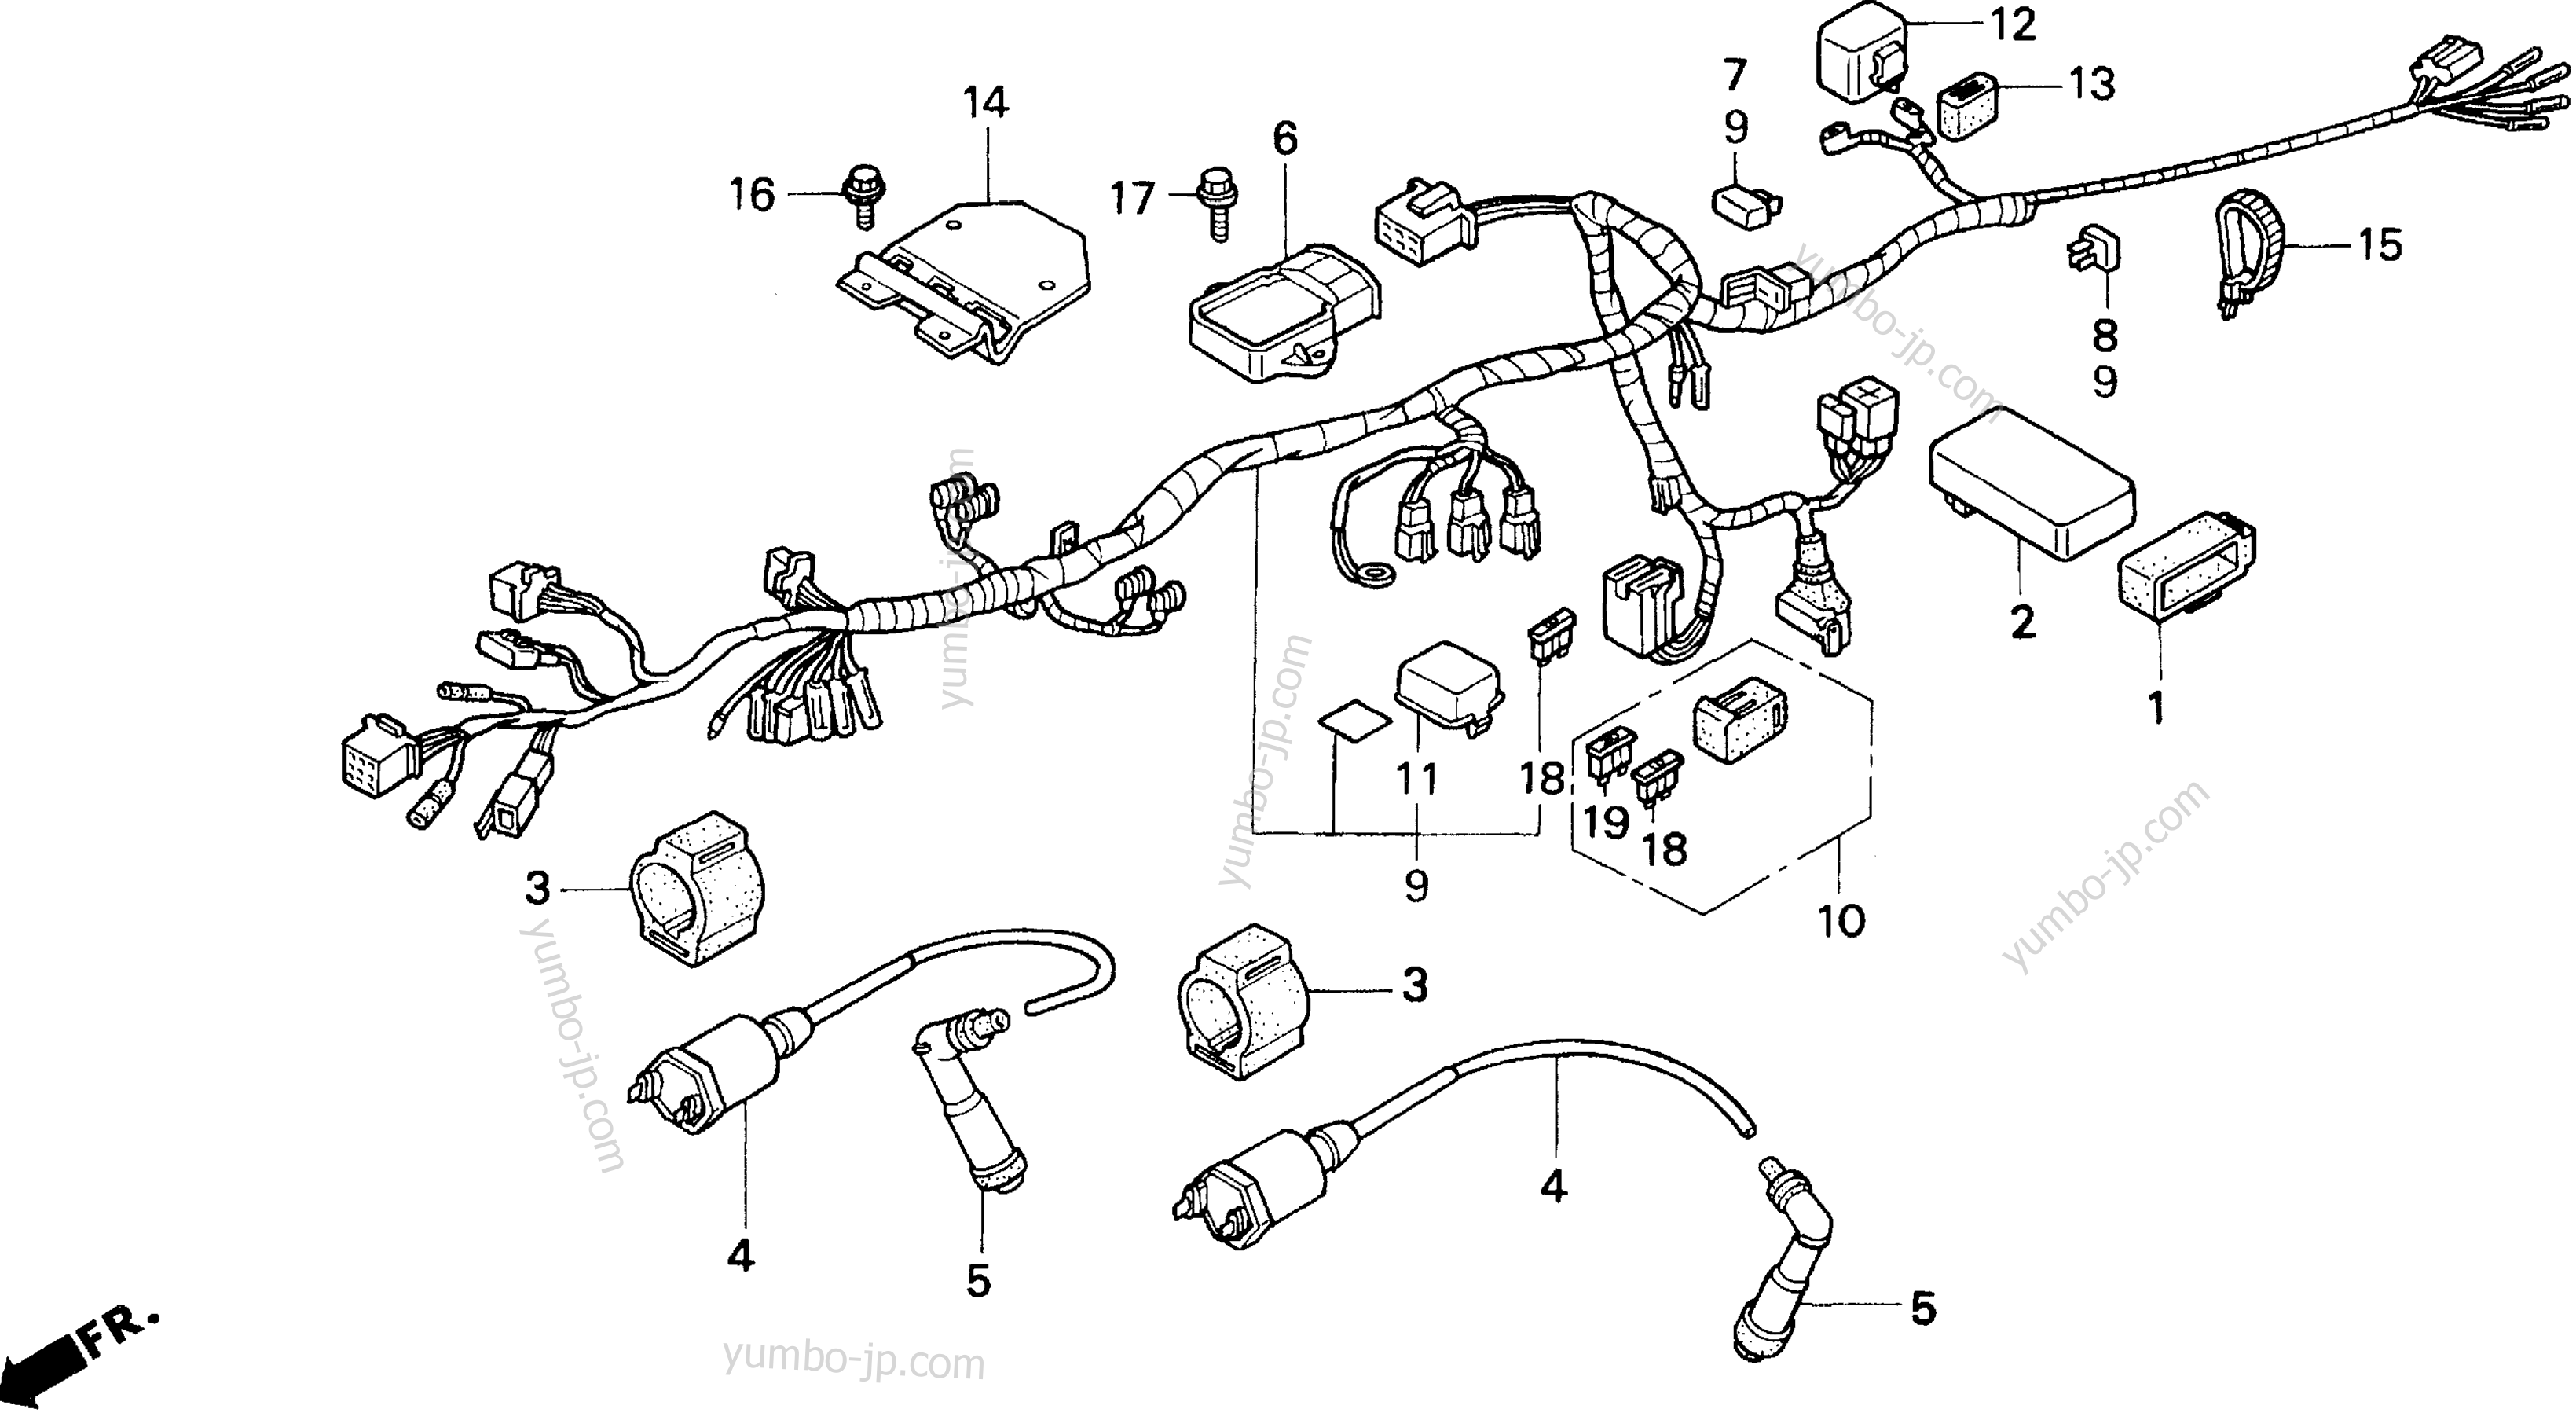 WIRE HARNESS for motorcycles HONDA CB250 AC 1995 year